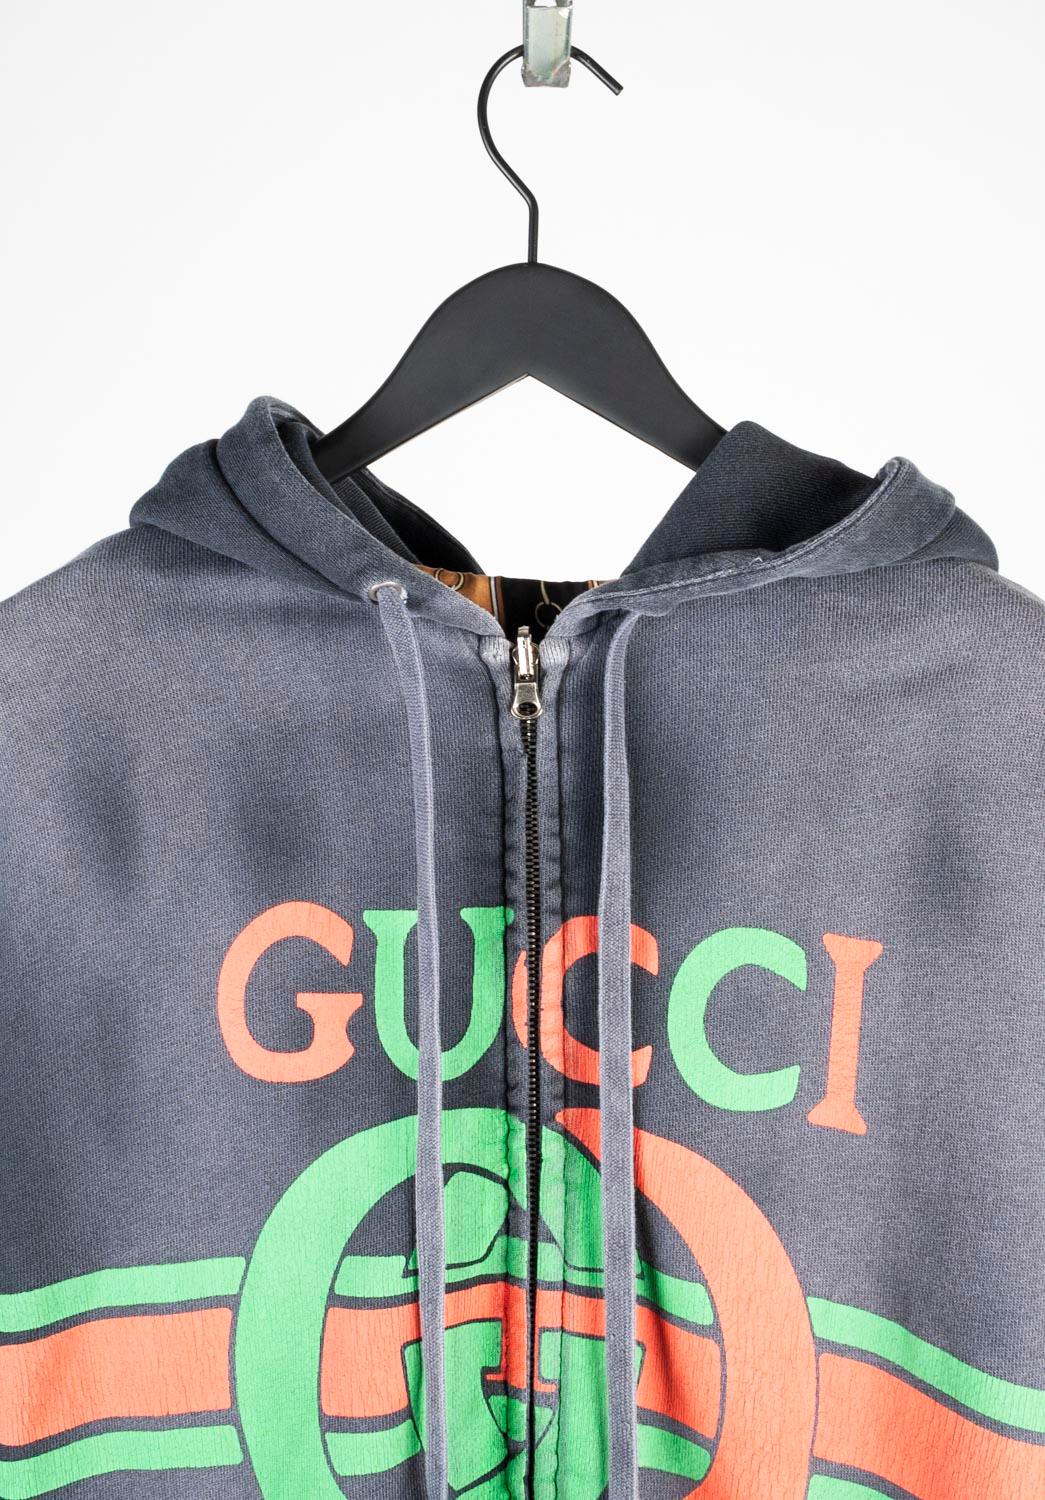 100% genuine Gucci Reversible Jacket Jumper, S669 
Color: grey
(An actual color may a bit vary due to individual computer screen interpretation)
Material: 100% cotton, other part is 100% Silk.
Tag size: M (runs oversized like Large)
This jumper is